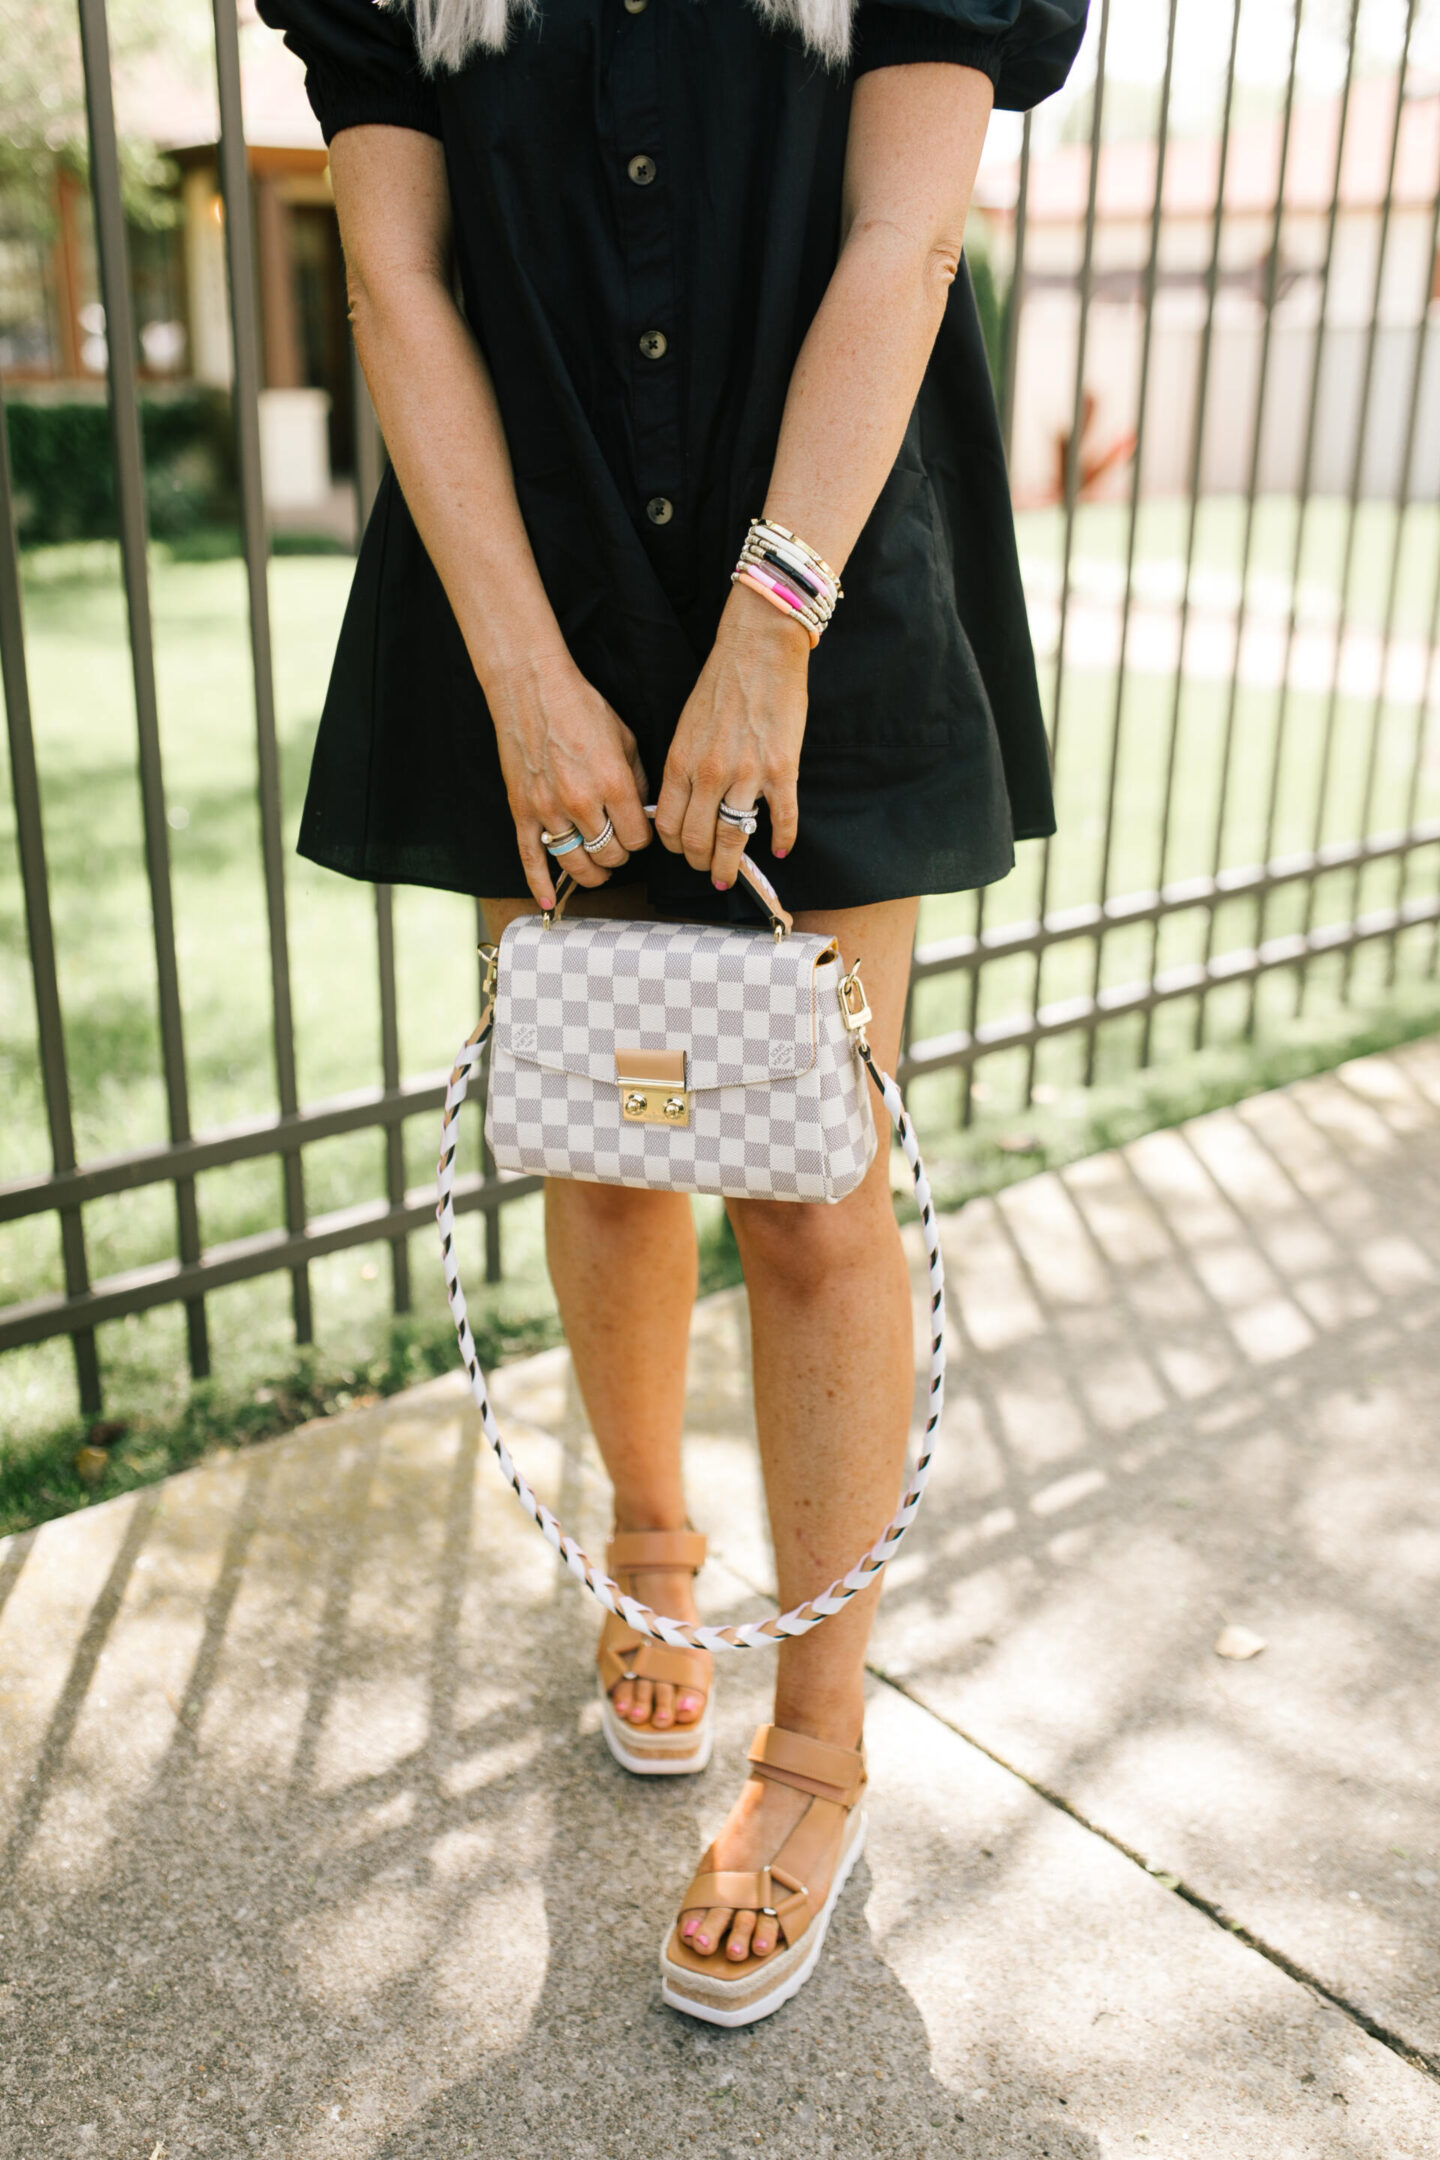 Rompers and Jumpers by popular Nashville fashion blog, Hello Happiness: image of a woman standing in front of a wrought iron fence and wearing a black off the shoulder romper, sunglasses, and holding a grey and white checker handbag. 